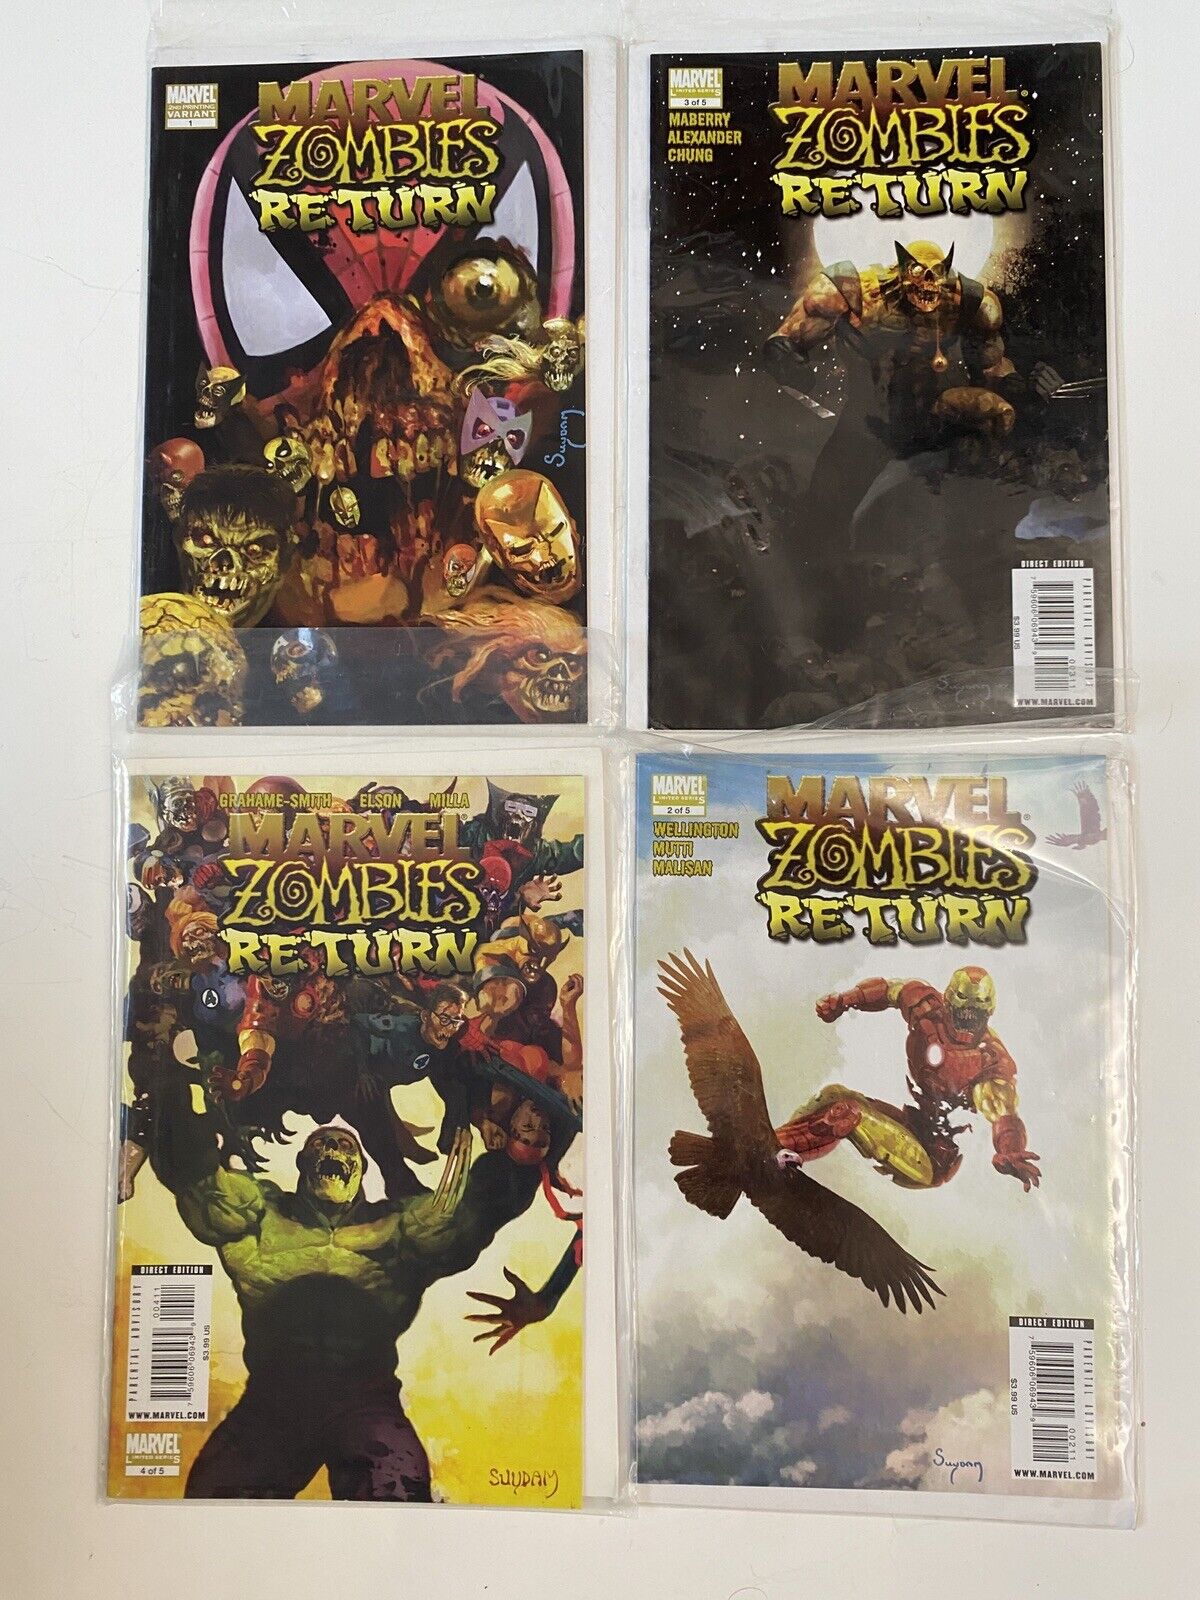 Lot of 4 Marvel Zombies Return Comics - Featuring Suydam Cover